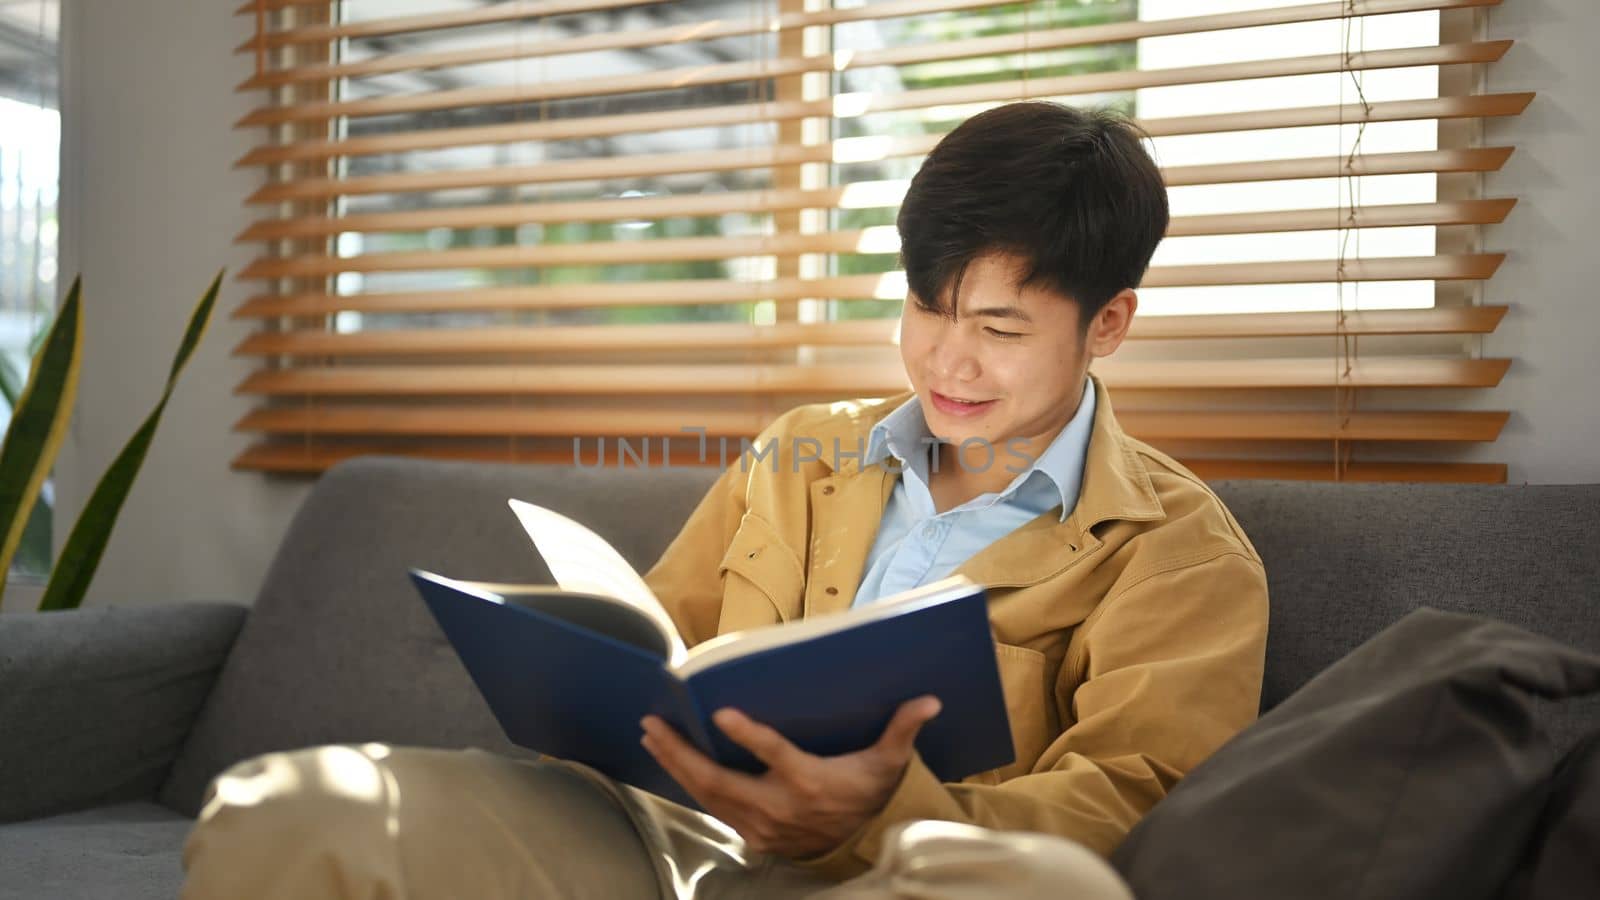 Satisfied man reading book, relaxing on comfortable couch at home. Leisure activity, positive mood concept by prathanchorruangsak